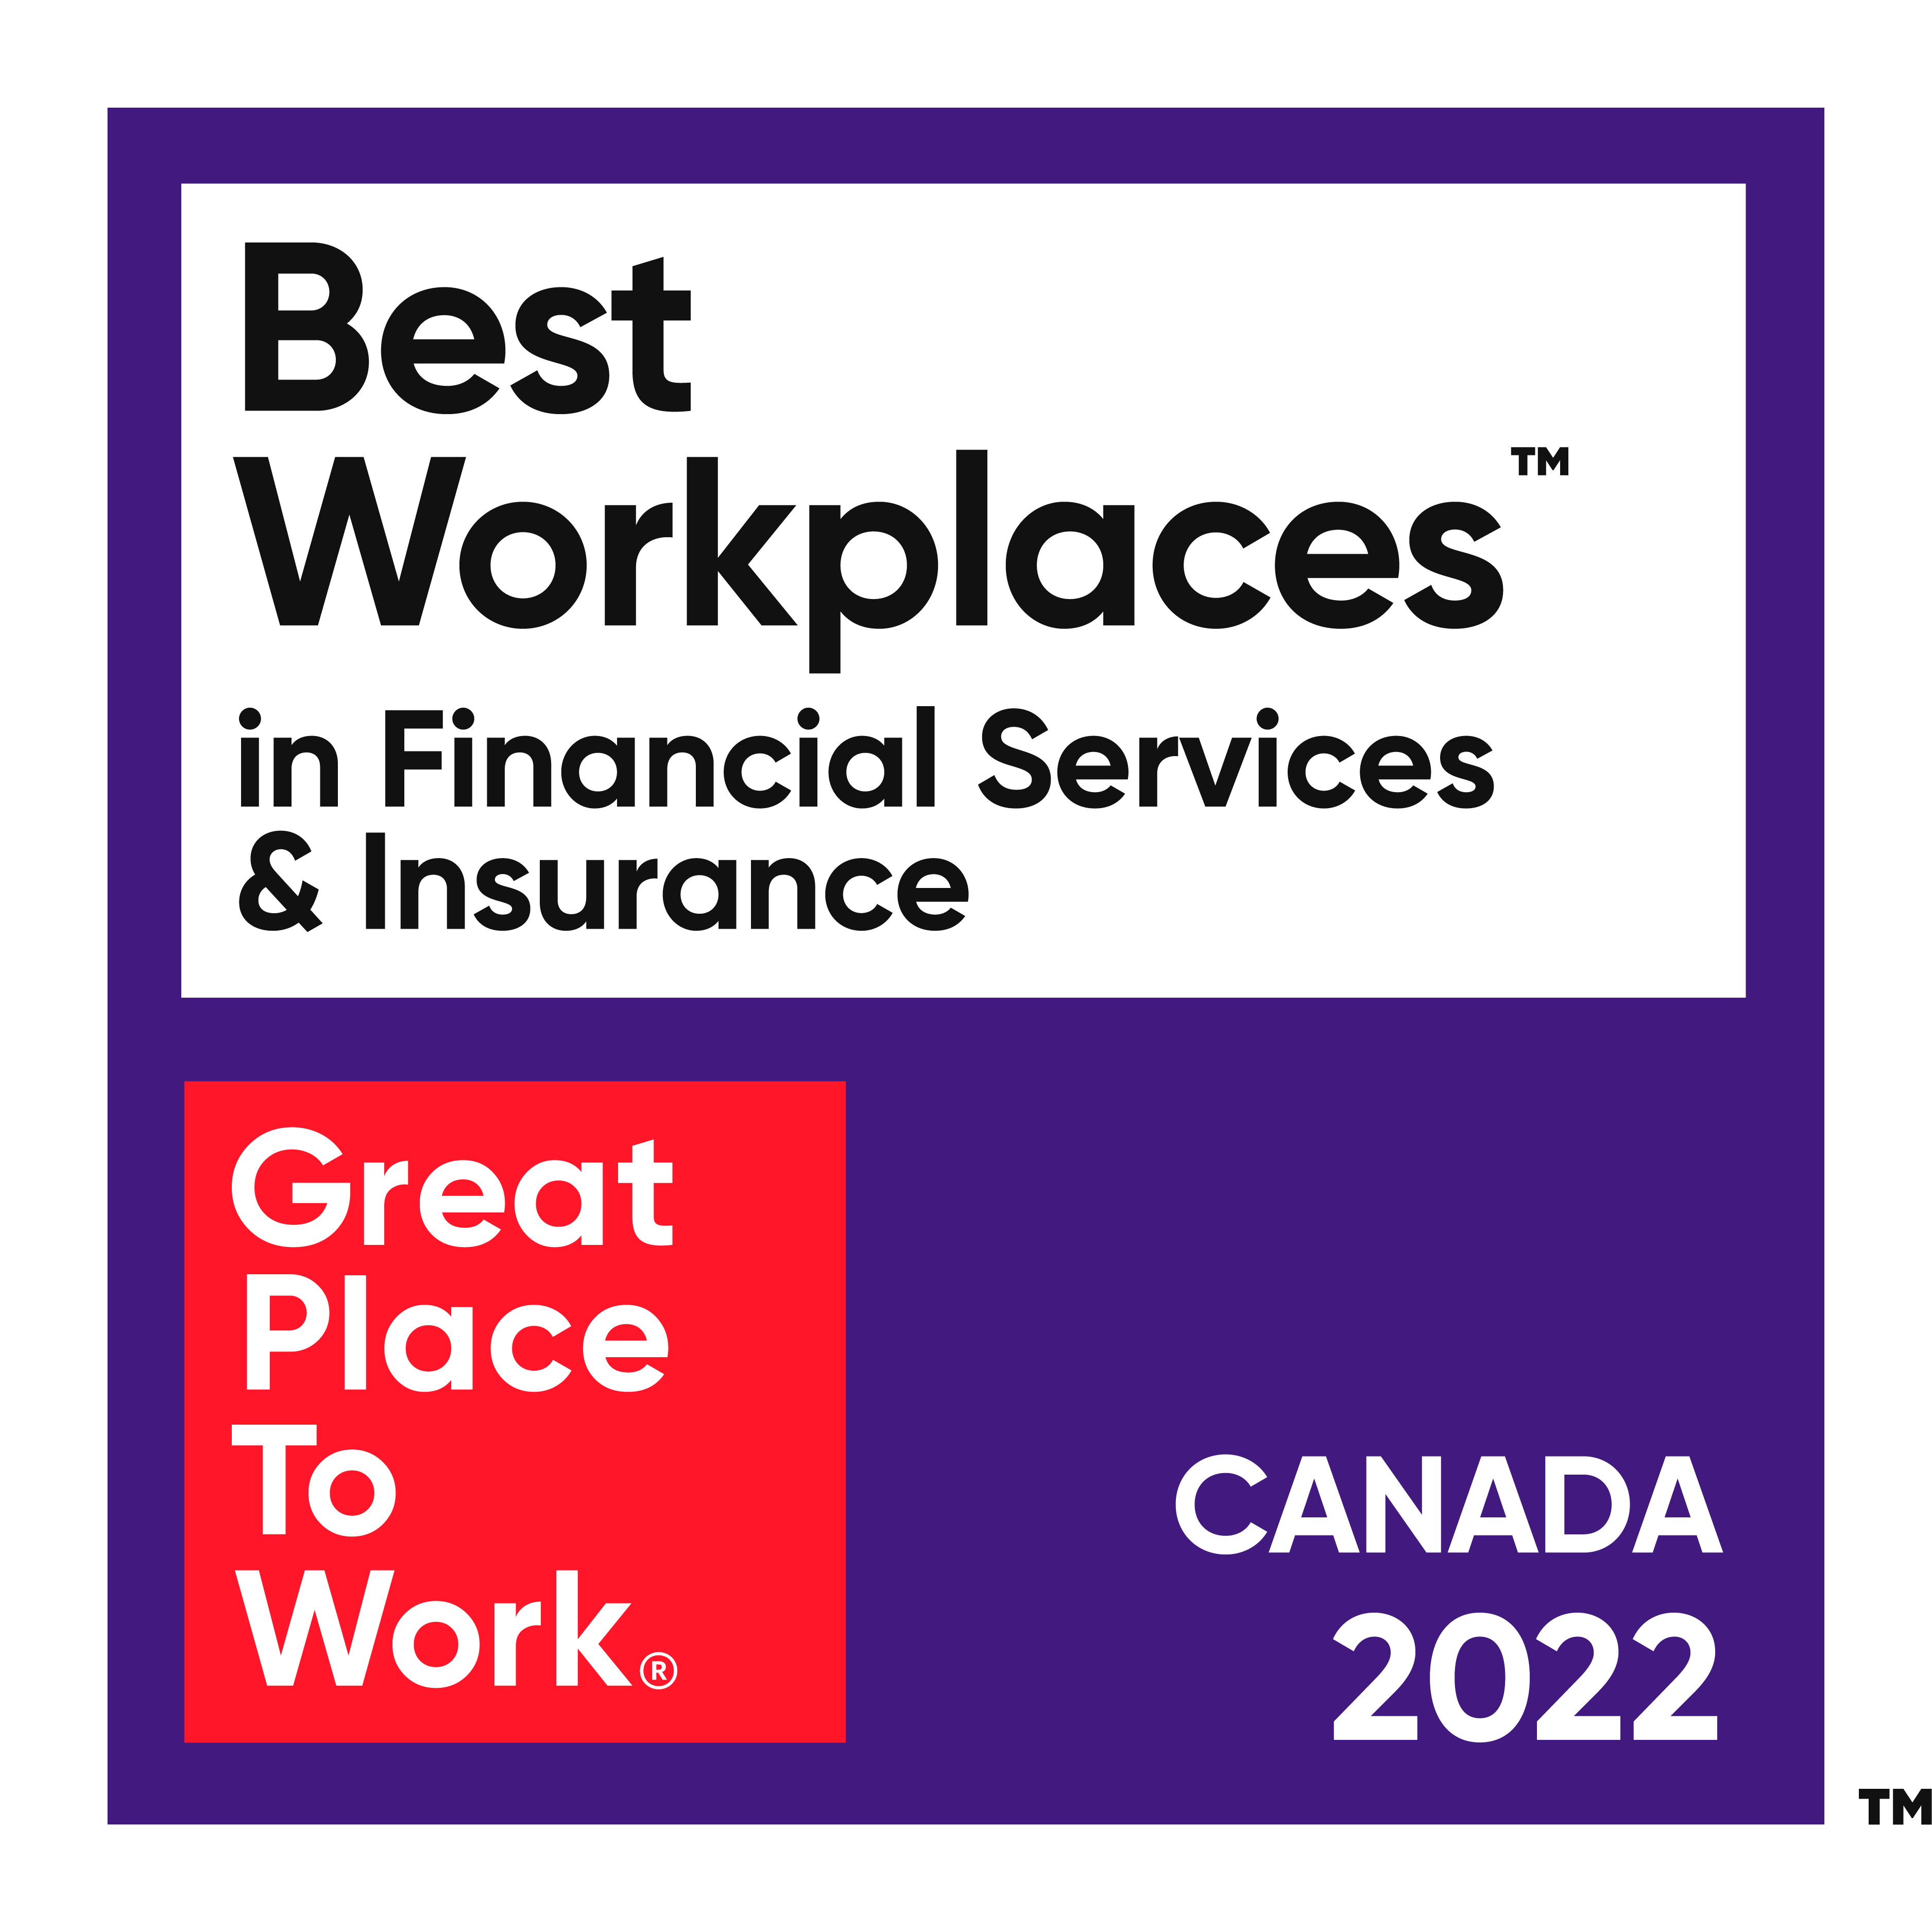 Best Workplaces in Financial Services & Insurance Canada 2022